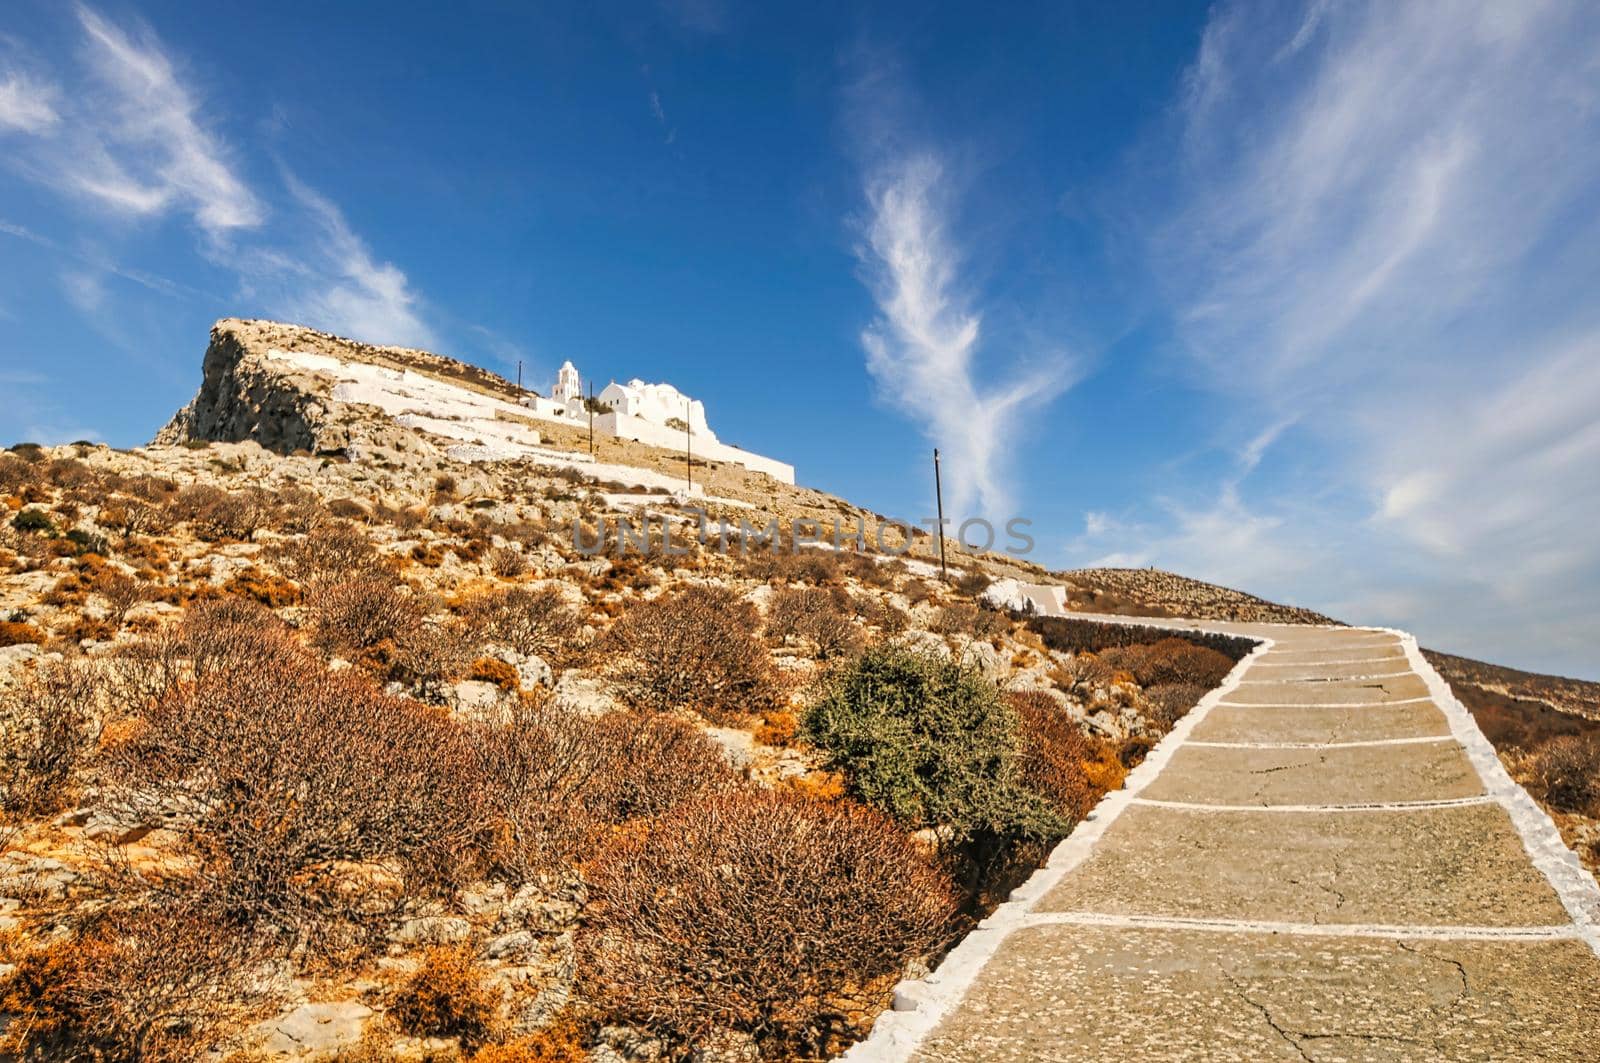 Path to Panagia church in Folegandros island Greece by feelmytravel